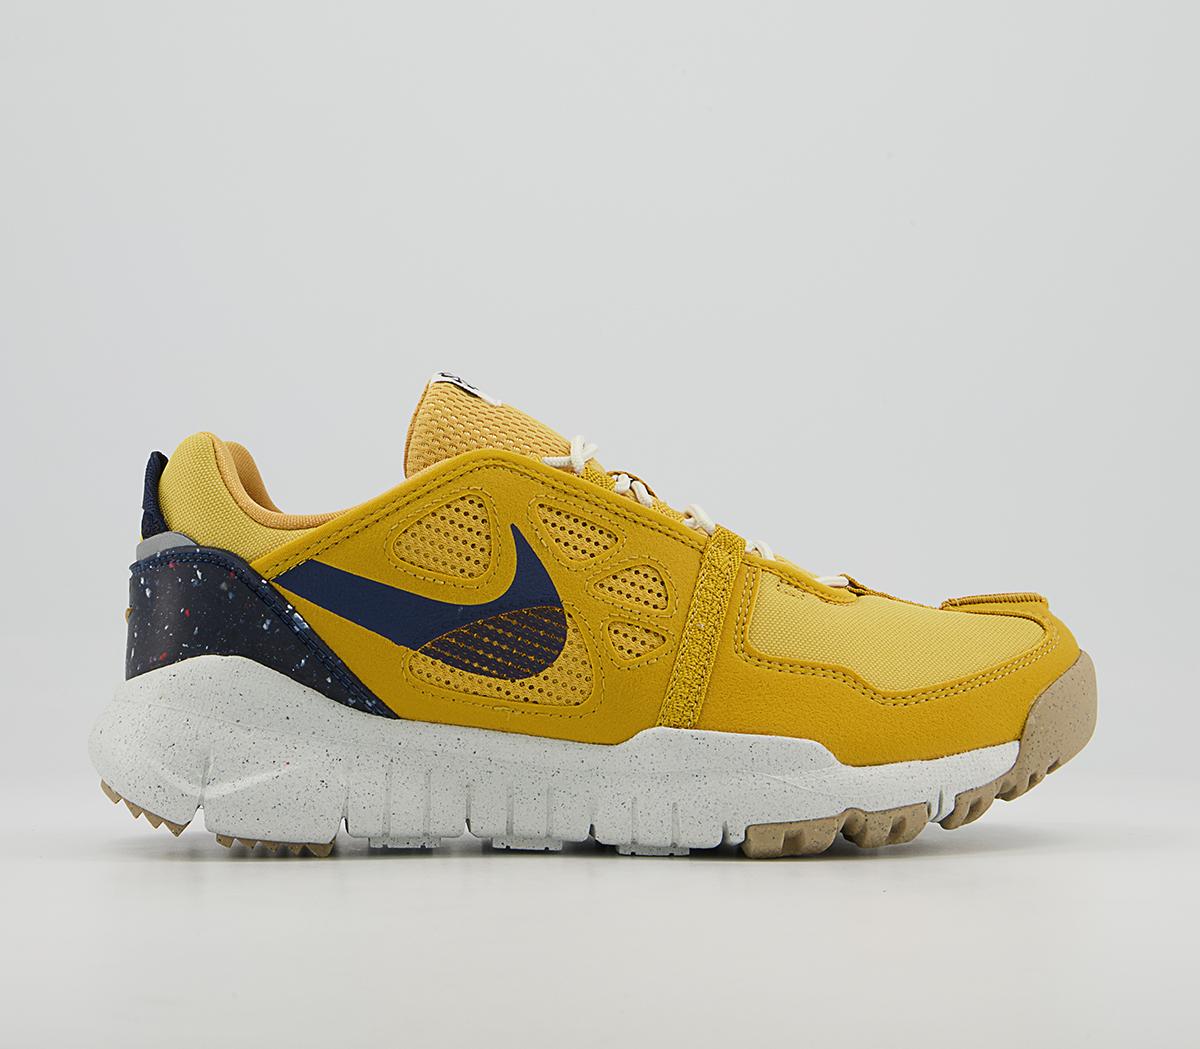 NikeFree Remastered TrainersSanded Gold Midnight Navy Goldtone